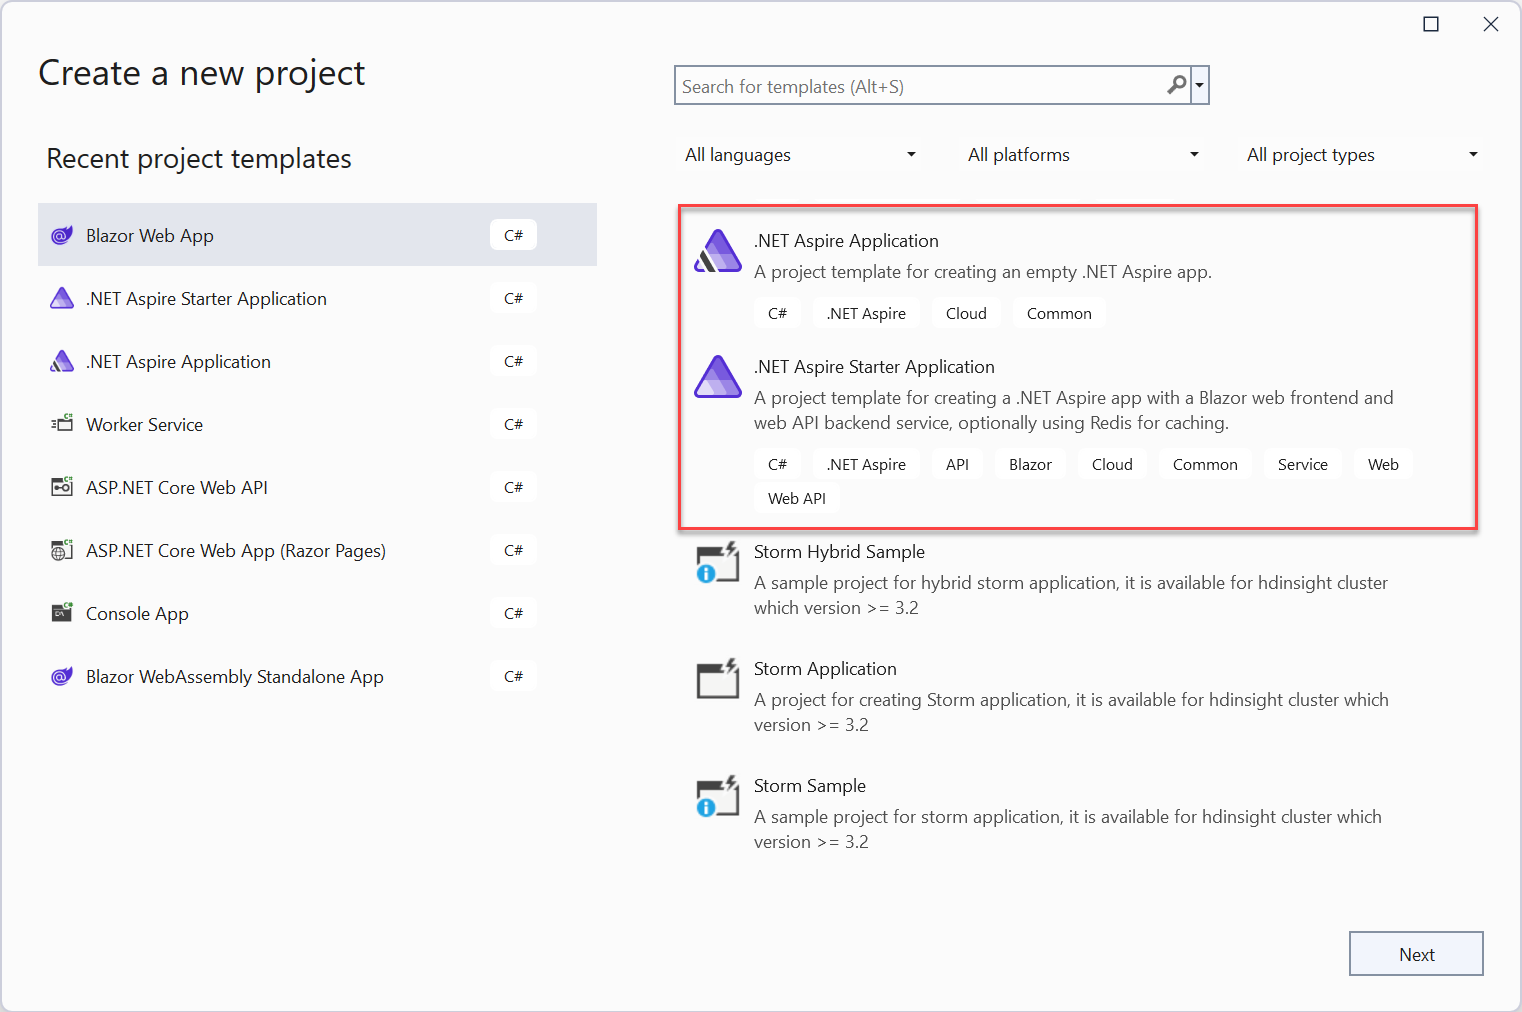 "Visual Studio project creation for .NET Aspire